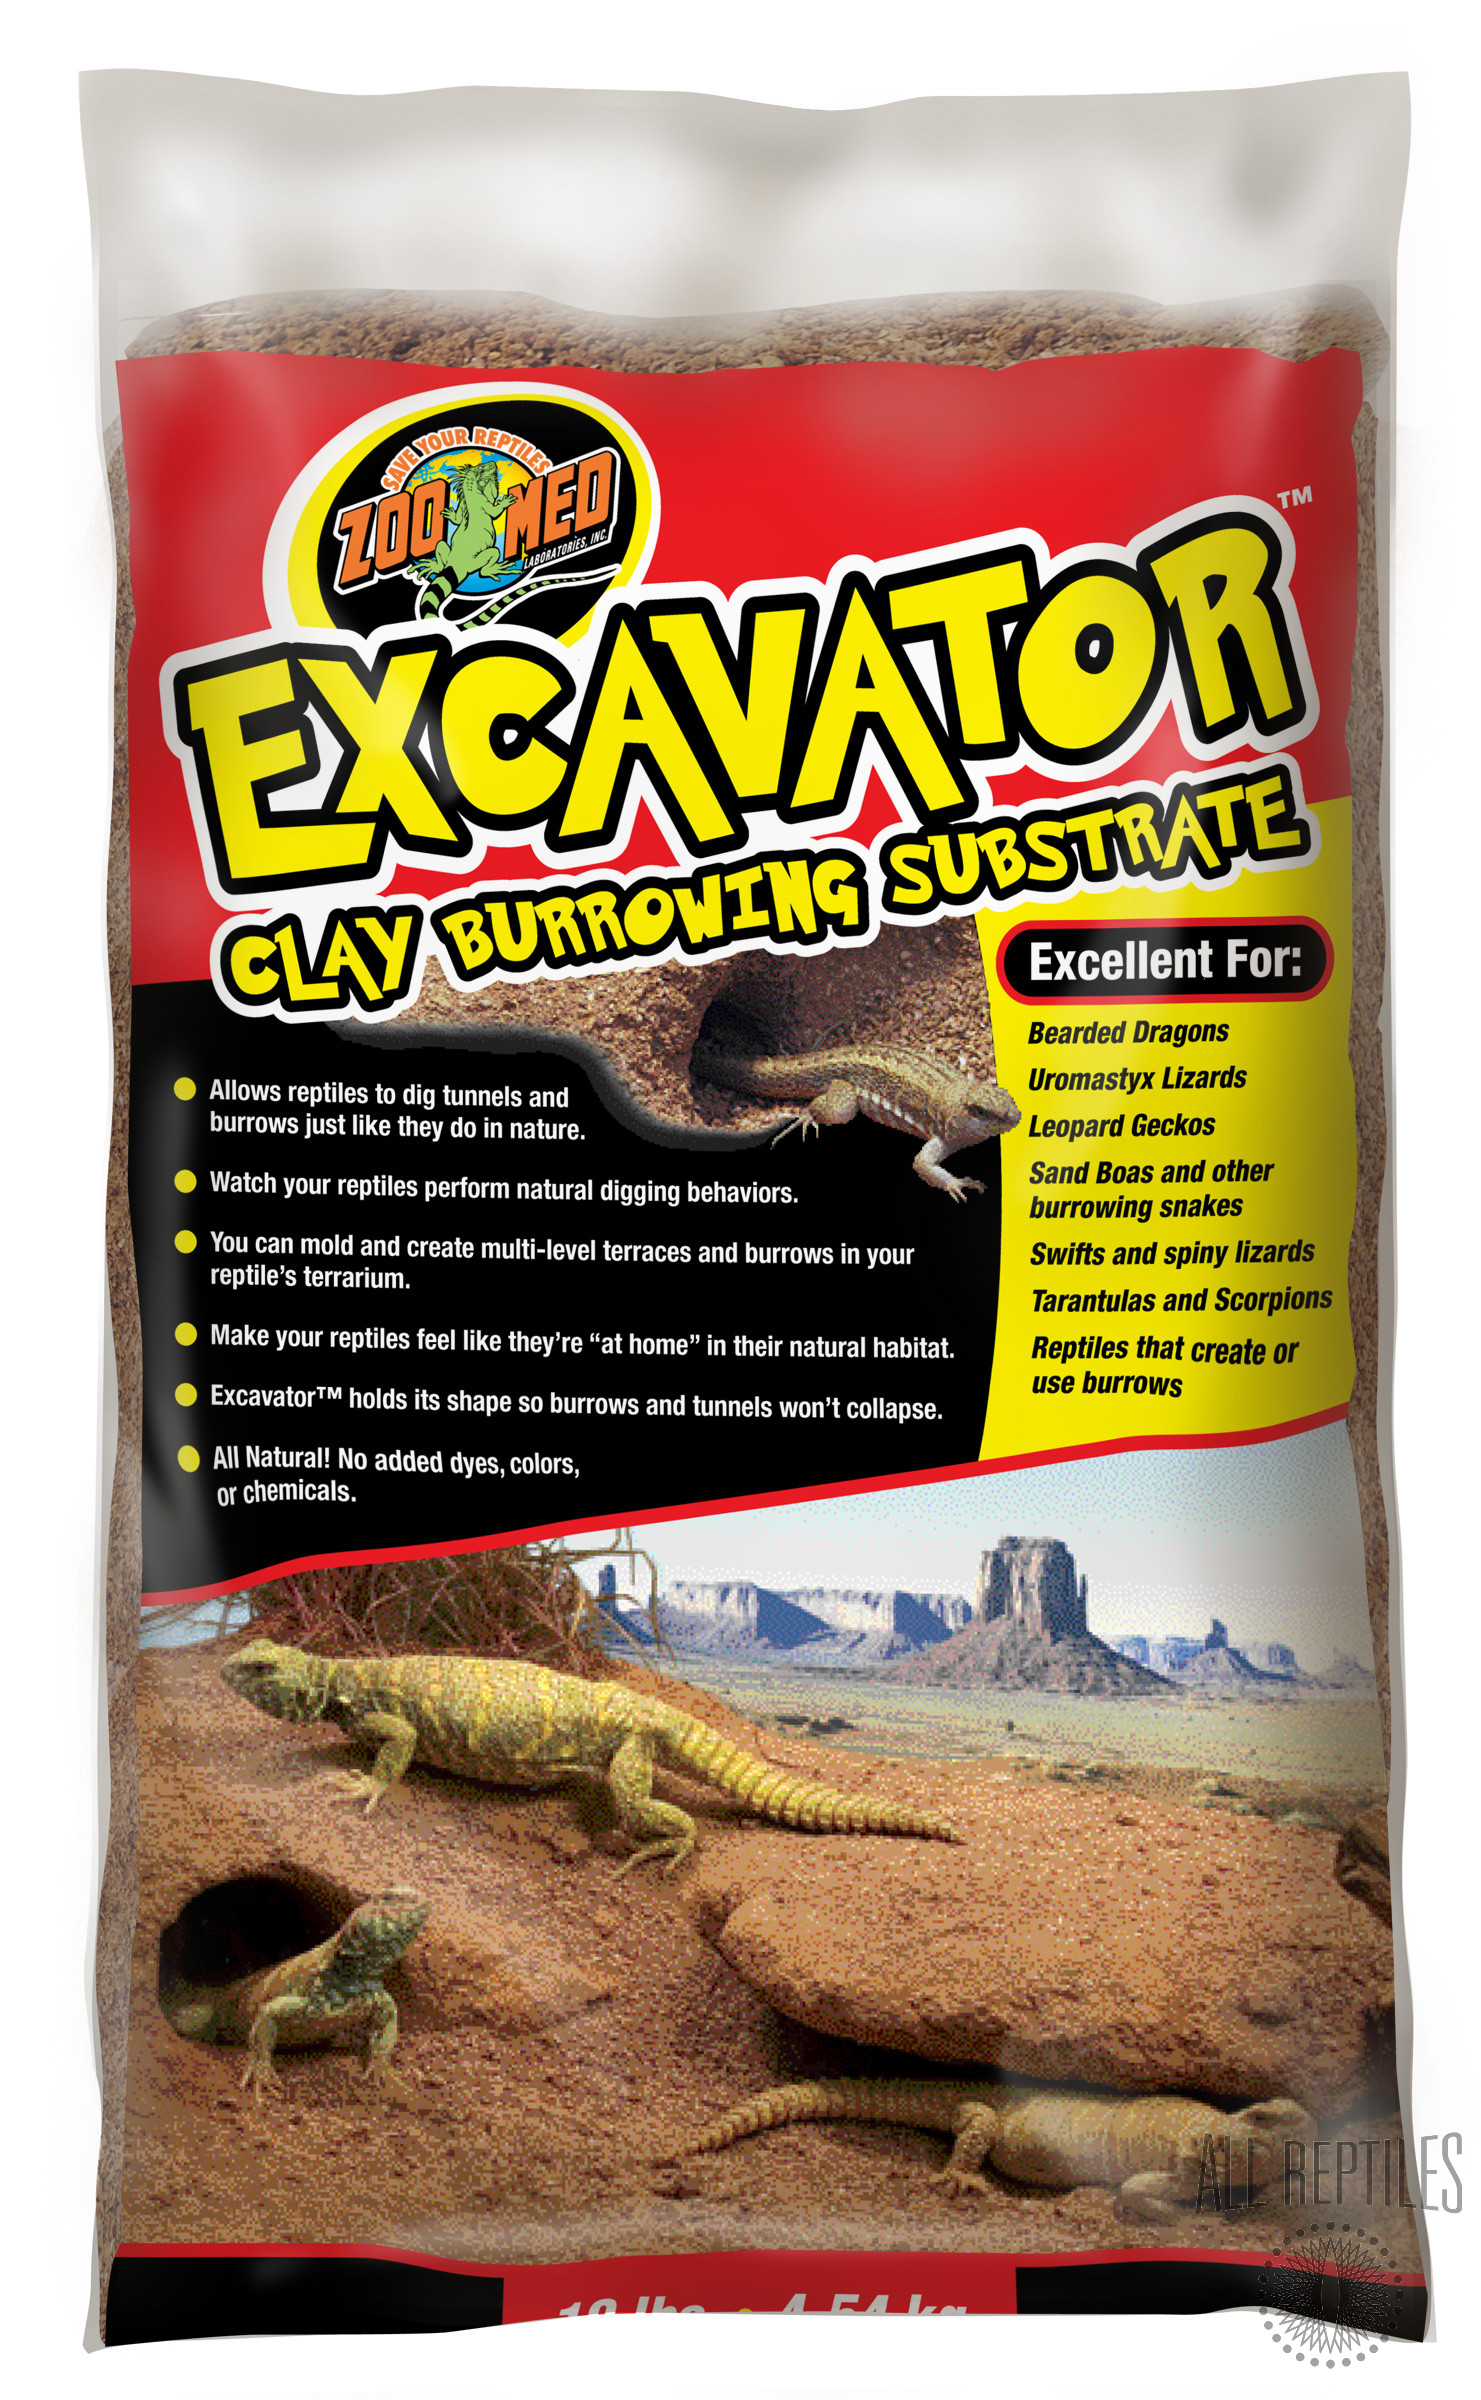 ZM Excavator Clay Burrowing Substrate